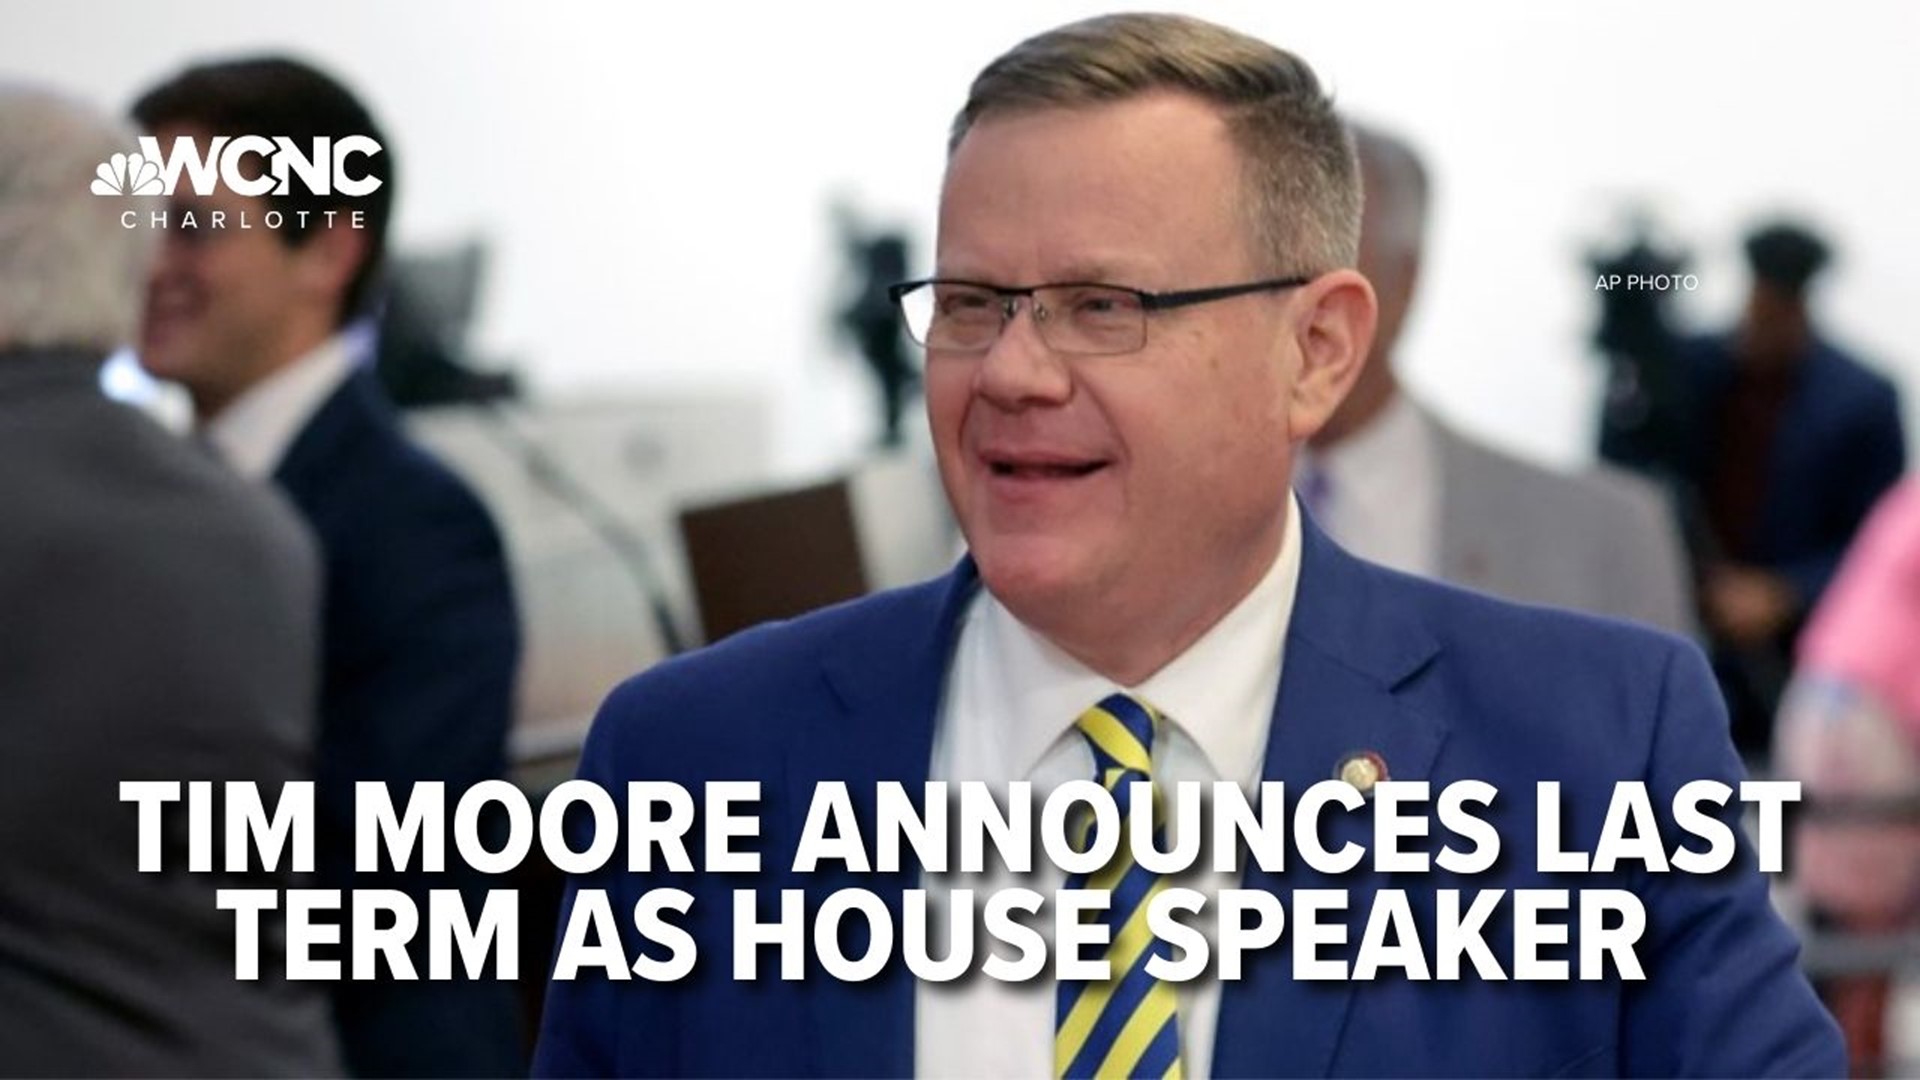 Moore, long a rumored congressional candidate, said any other plans are "yet to be determined."